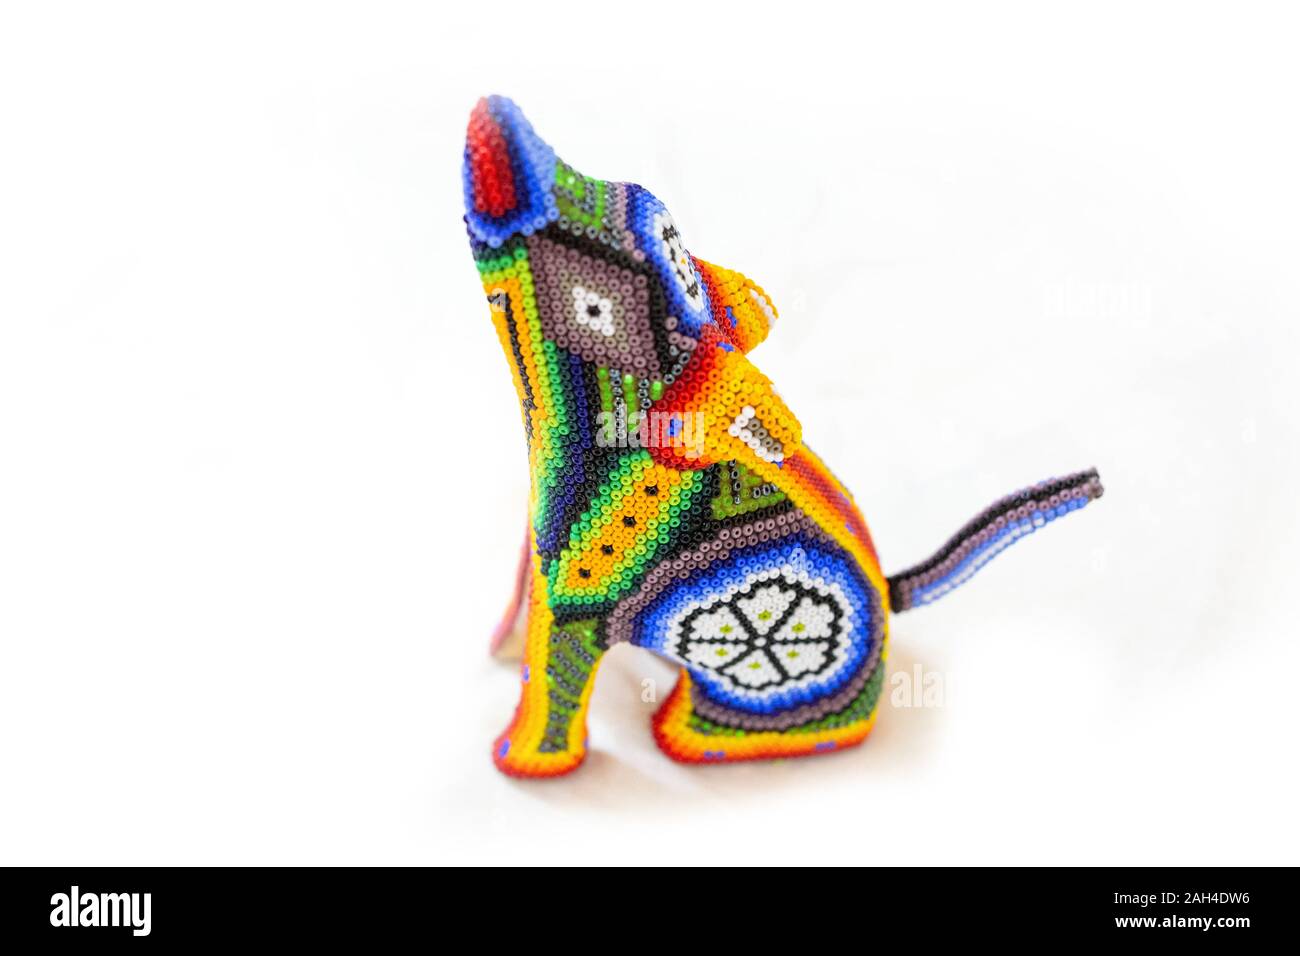 Traditional huichol bead ornament figures mexican culture work Stock Photo